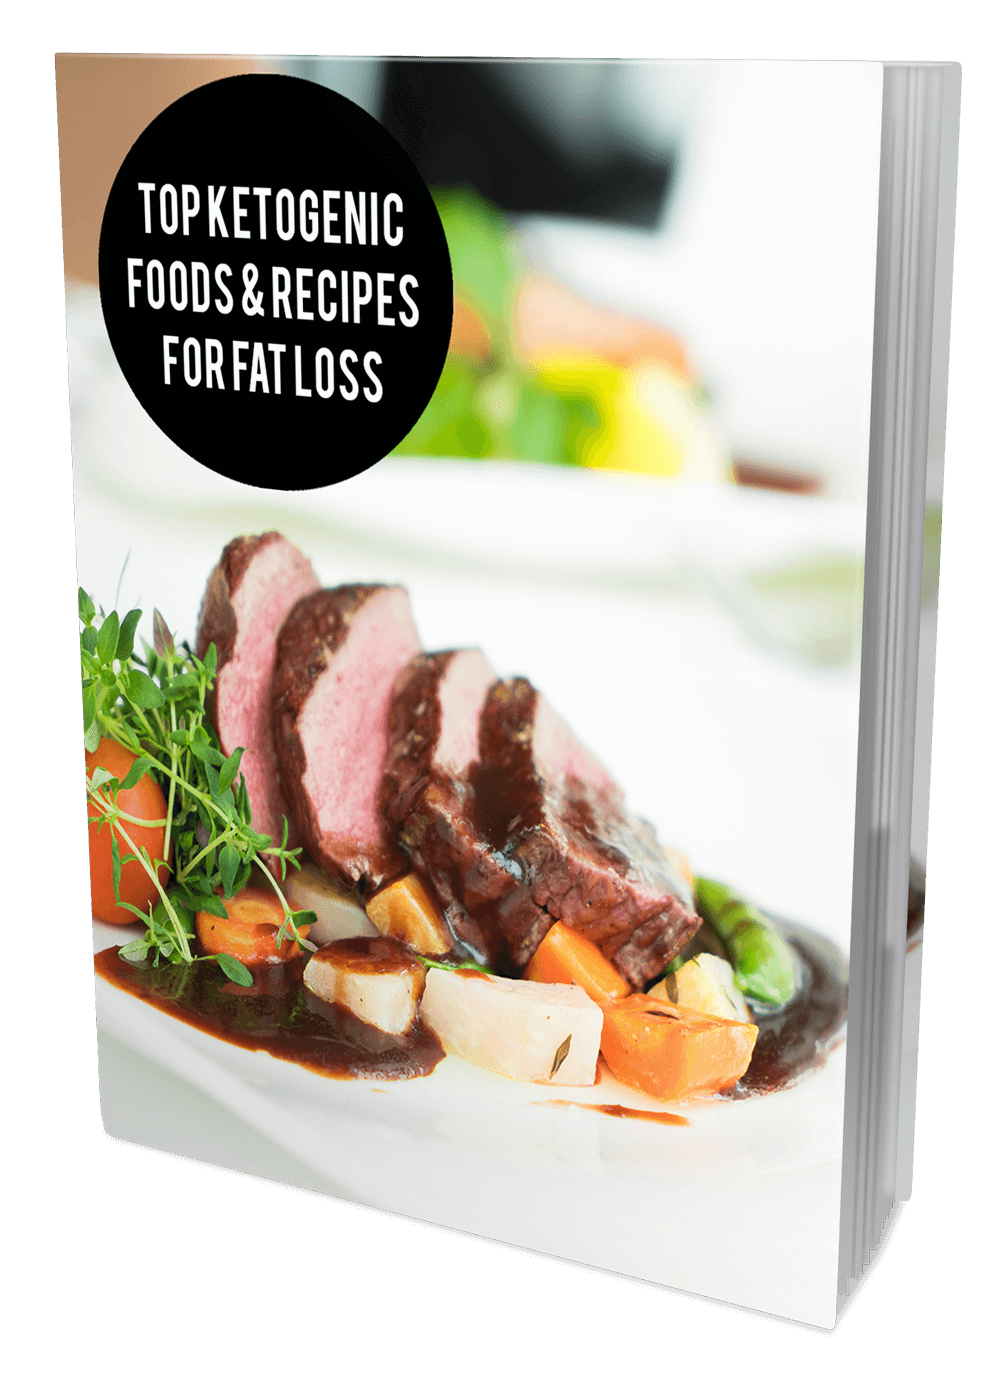 Top Ketogenic Foods and Recipes for Fat Loss